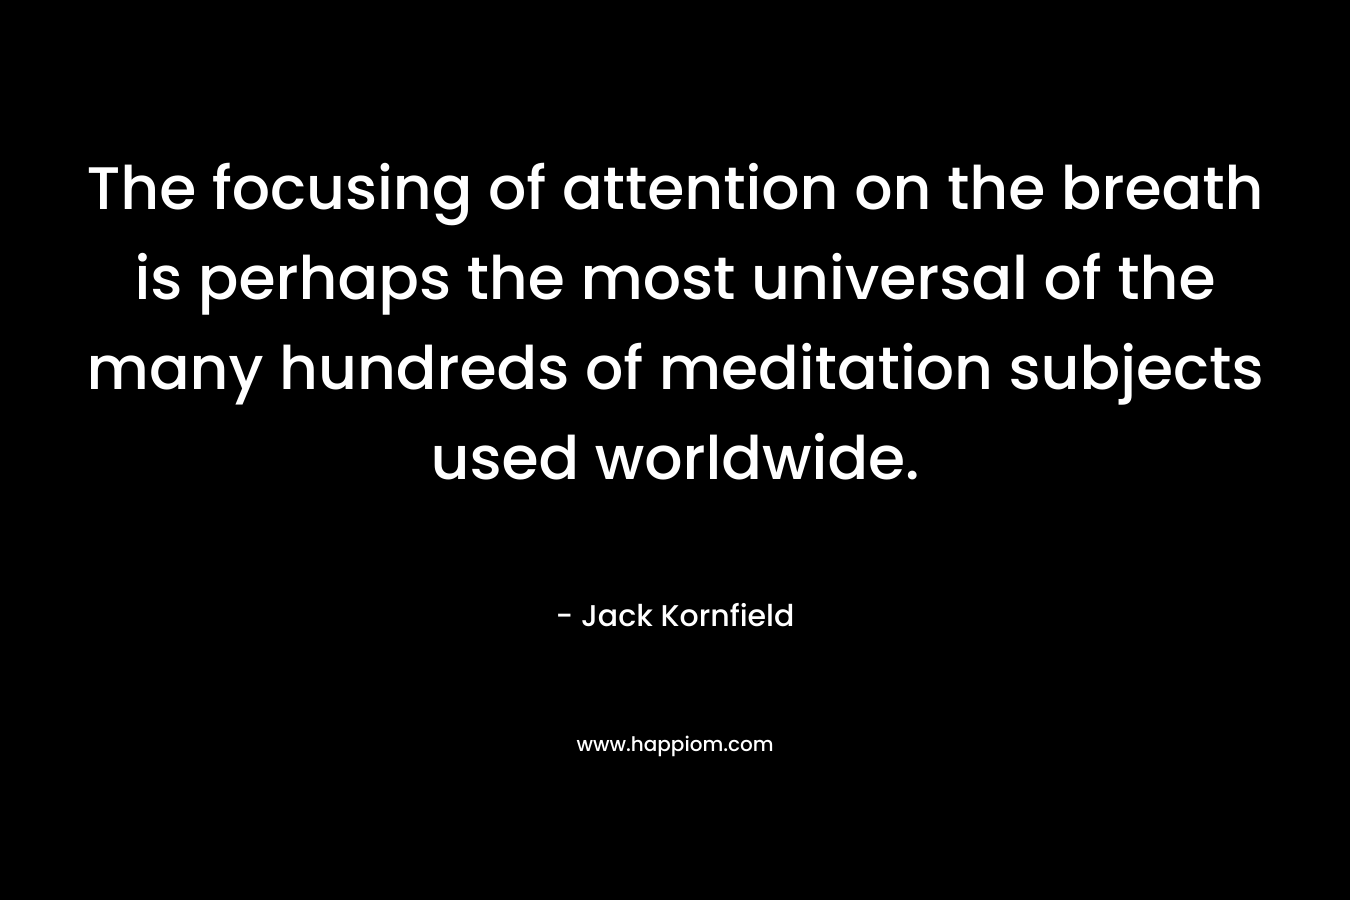 The focusing of attention on the breath is perhaps the most universal of the many hundreds of meditation subjects used worldwide. – Jack Kornfield